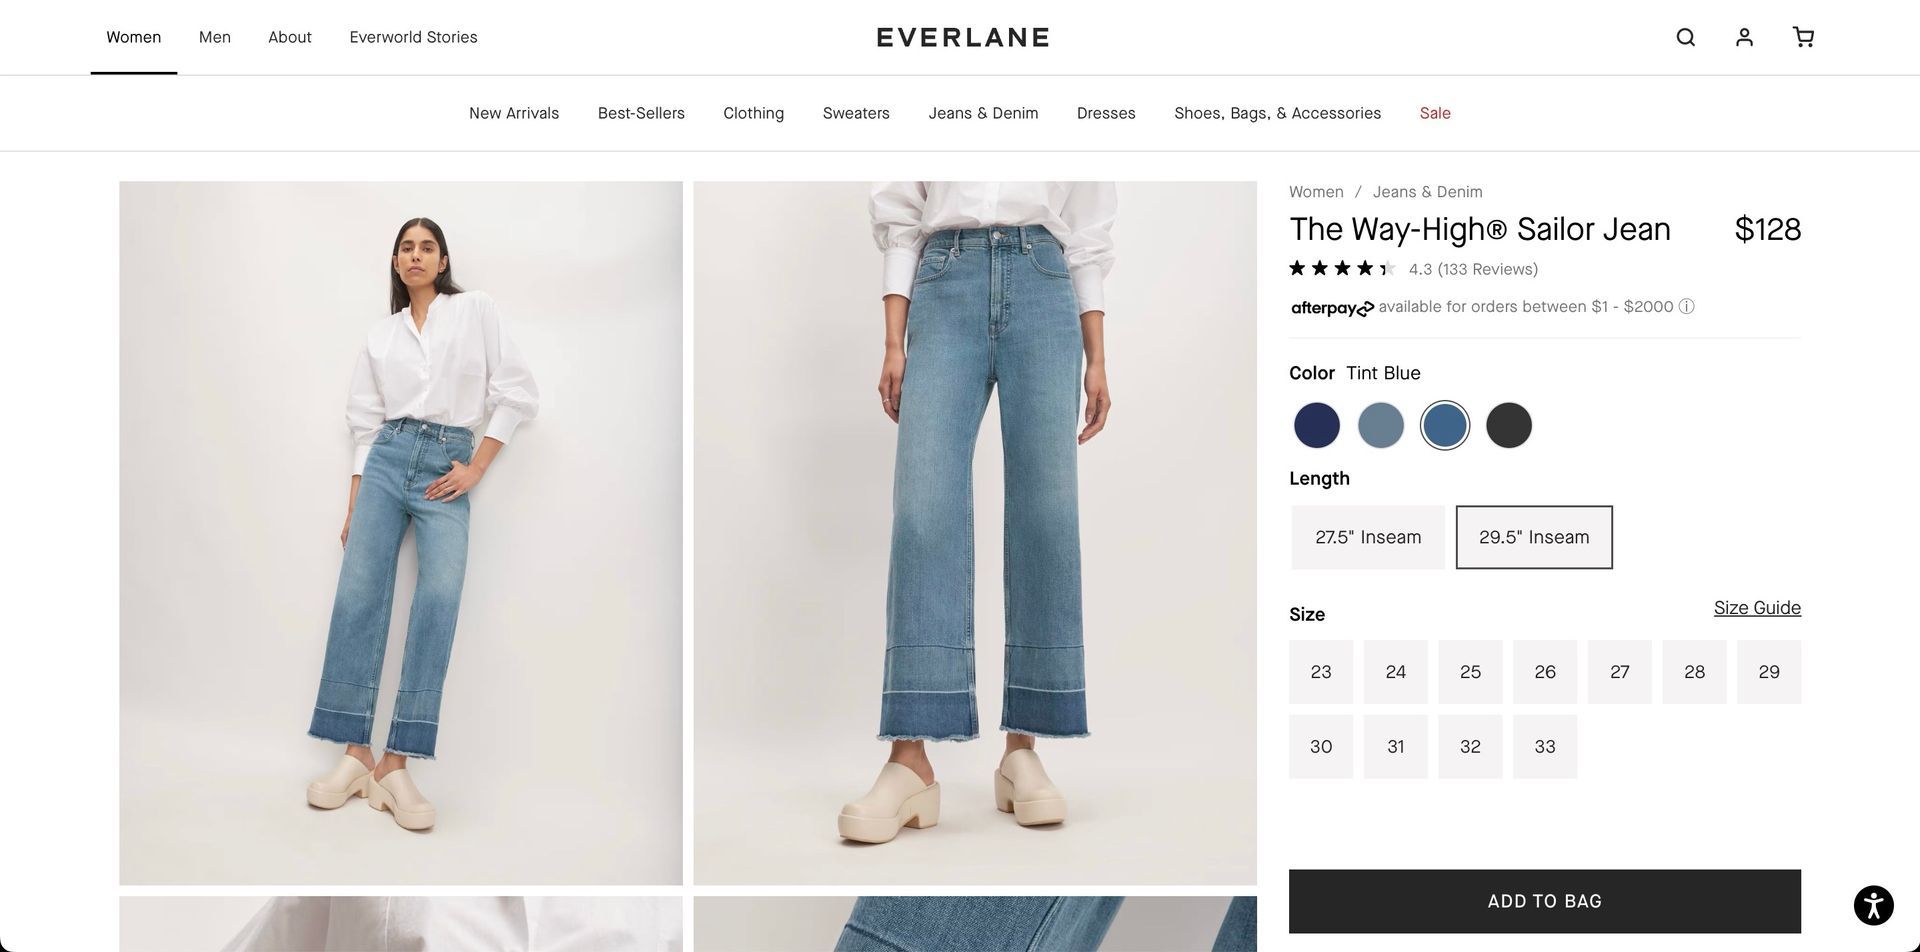 Everlane's product page